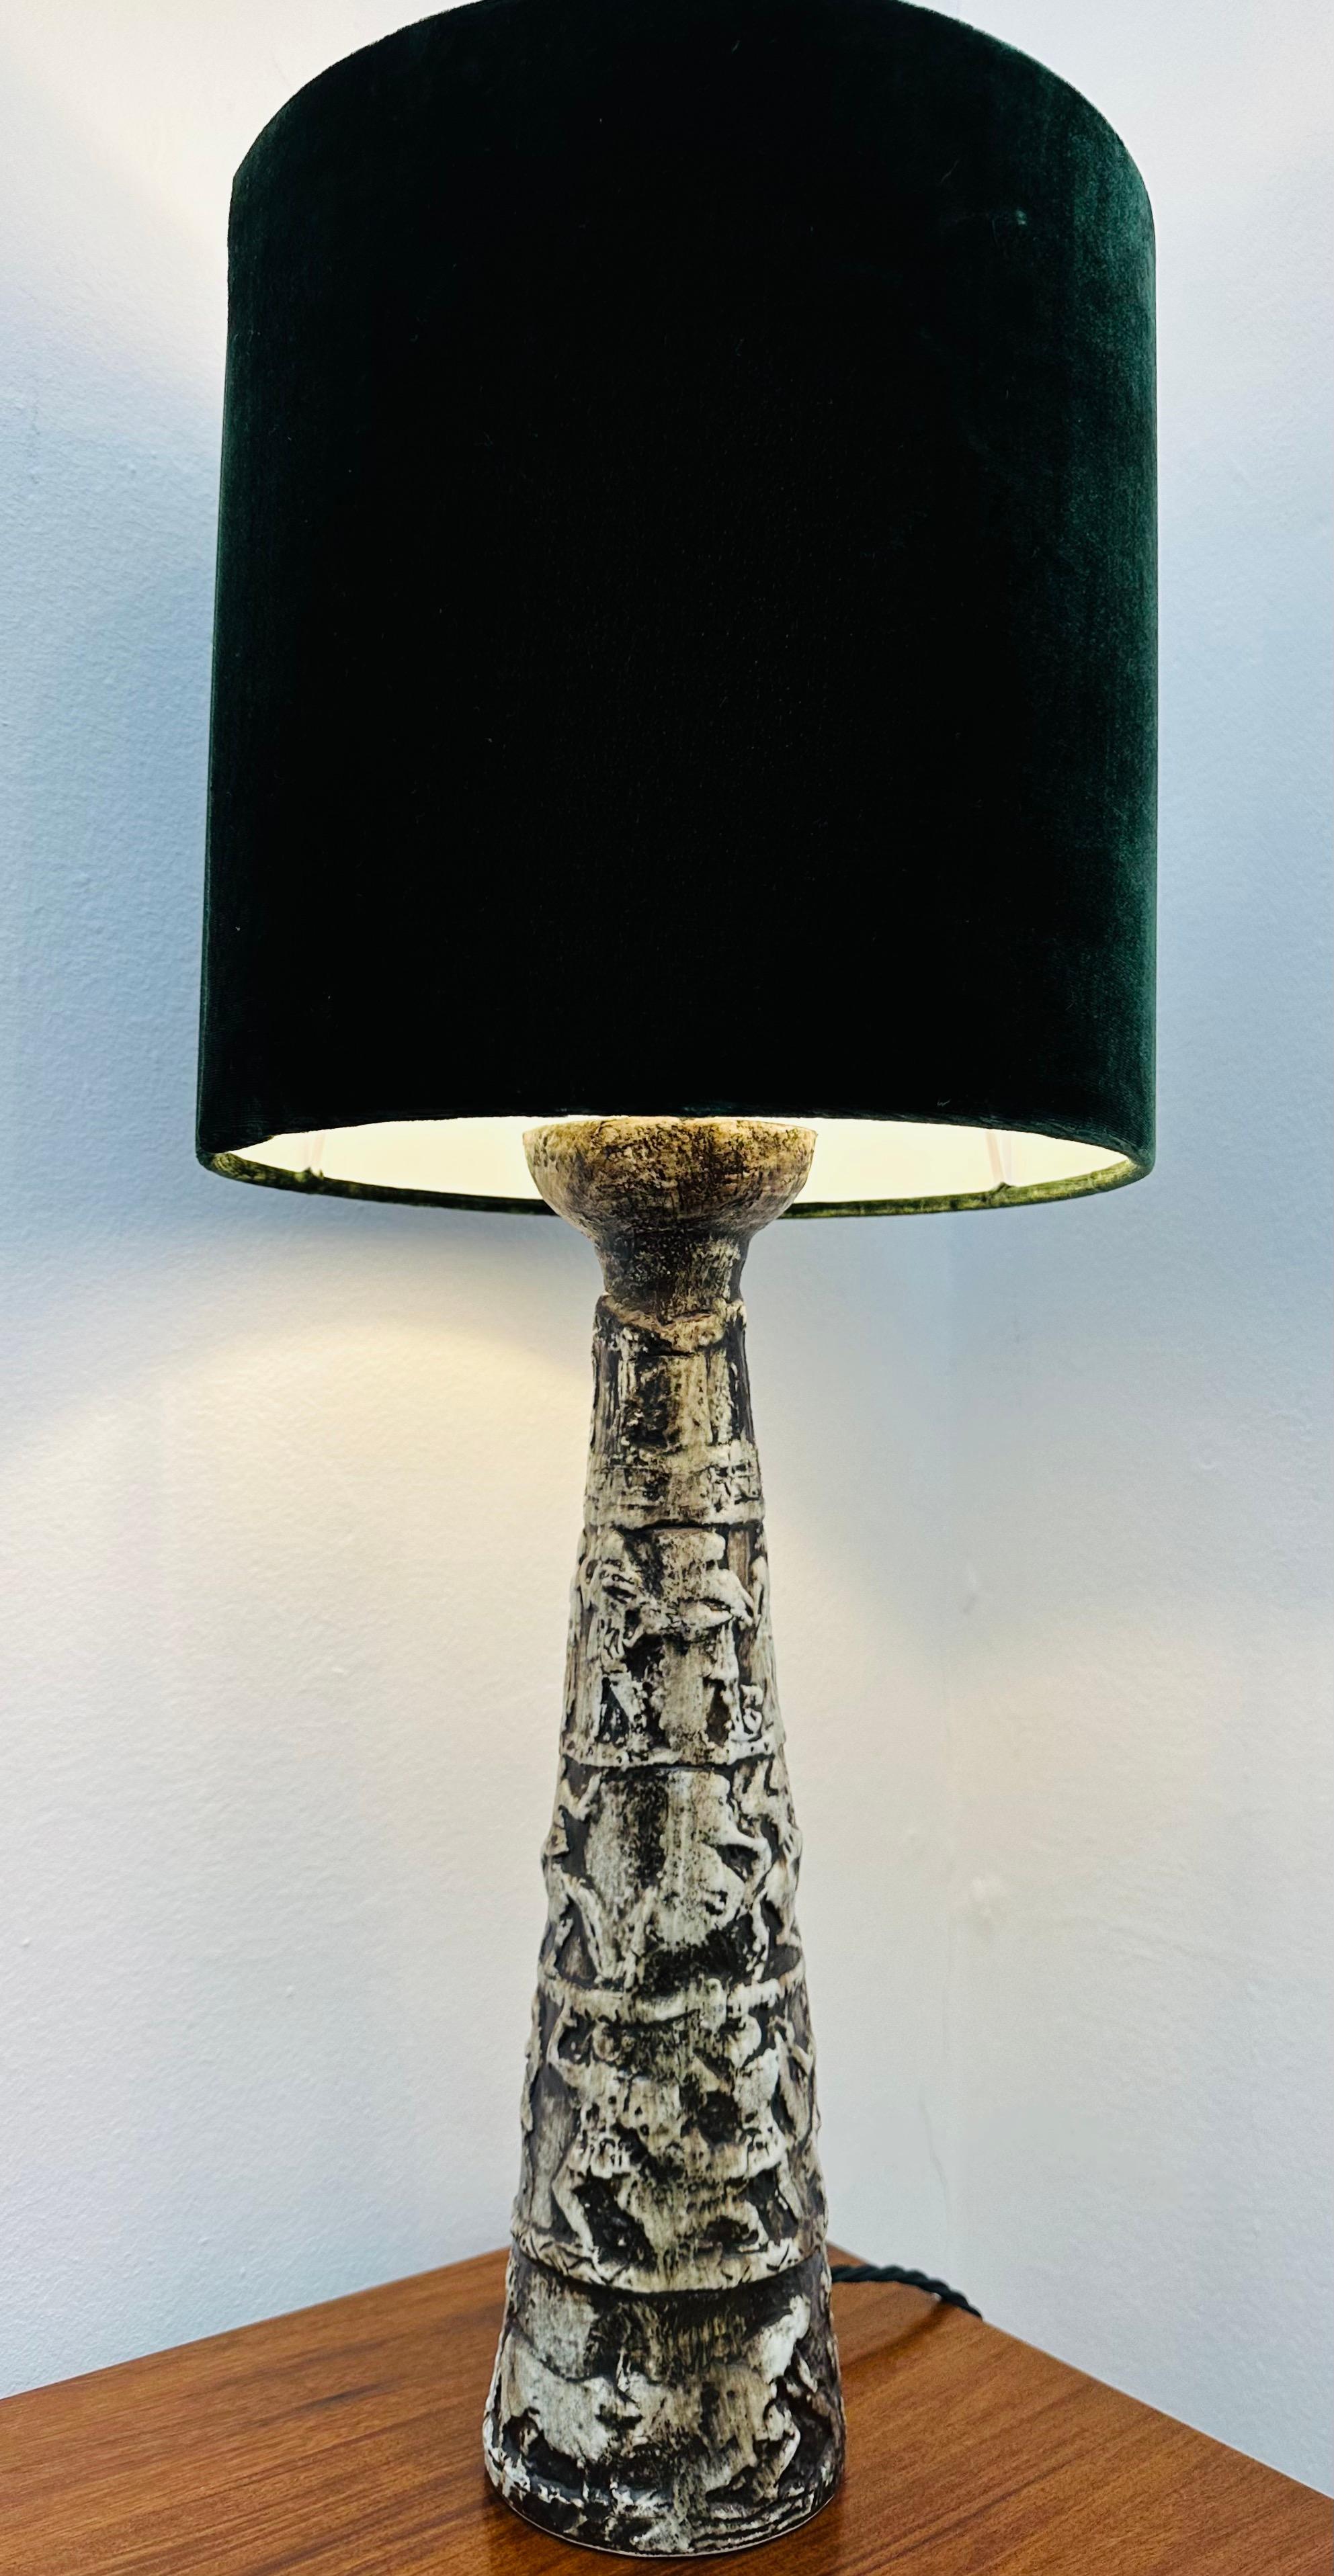 1950s Italian designed by Aldo Londi and manufactured by Bitossi ceramic pottery table lamp base. Following some research I believe it may have originally been a candlestick but converted to a table lamp in the past. The antique brass bulb holder